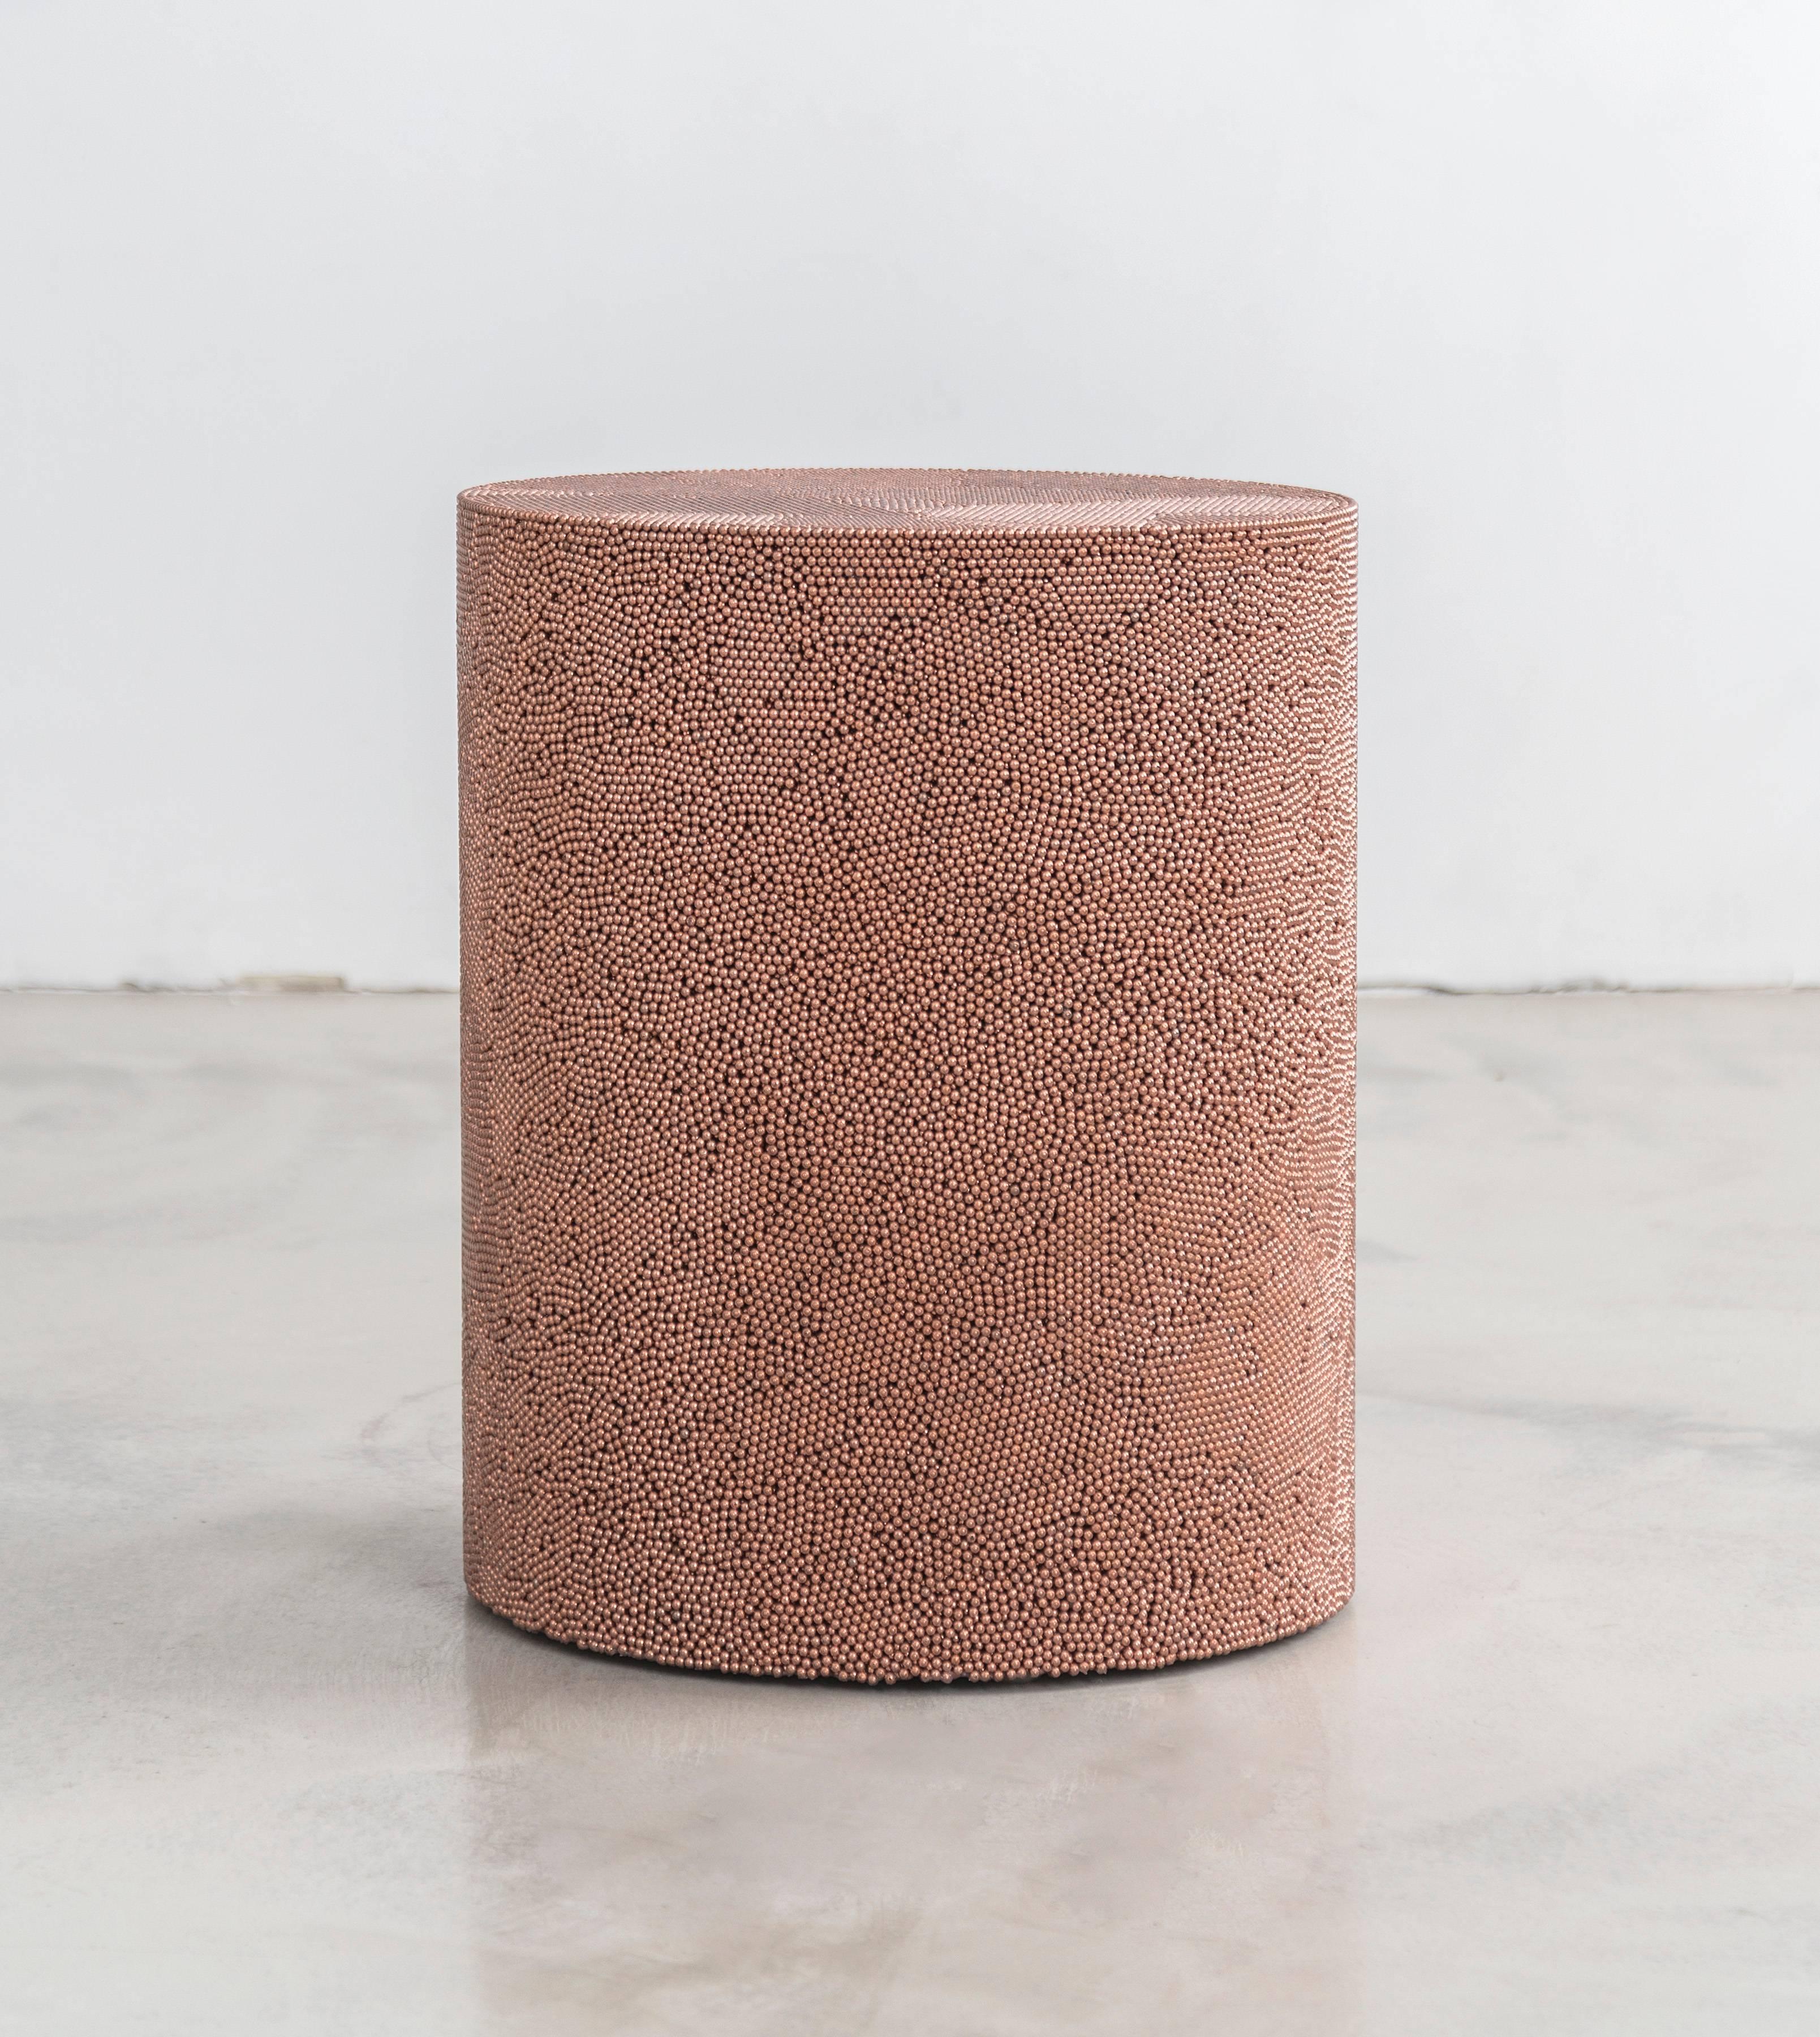 Composed from copper BB pellets, this made-to-order drum has a hollow cavity and consists fully of copper ammunition, creating a hypnotic camouflage of texture and smoothness. The piece has a hollow cavity and weighs approximately 90lbs.